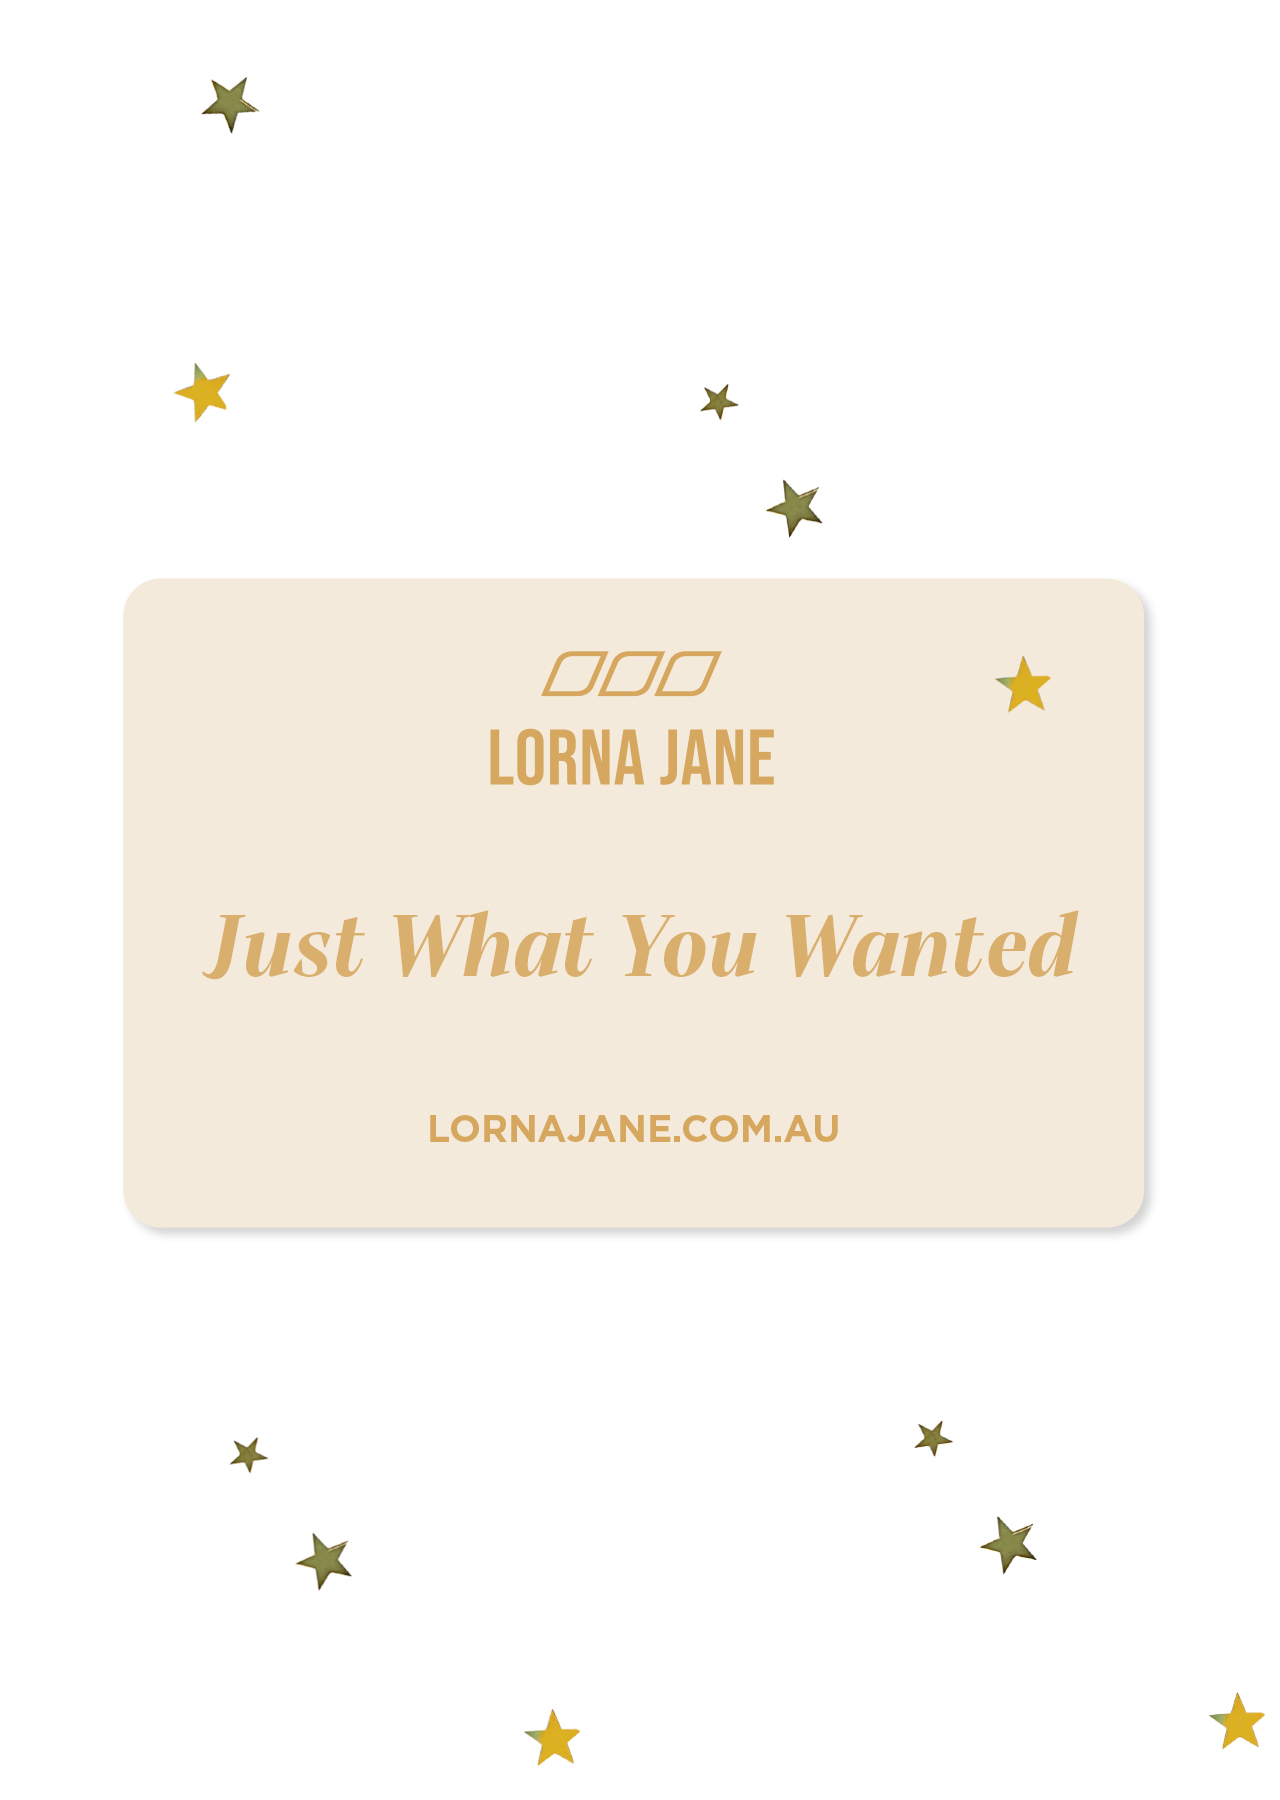 Yellow Lorna Jane Gift card with Company logo and just what you wanted across front